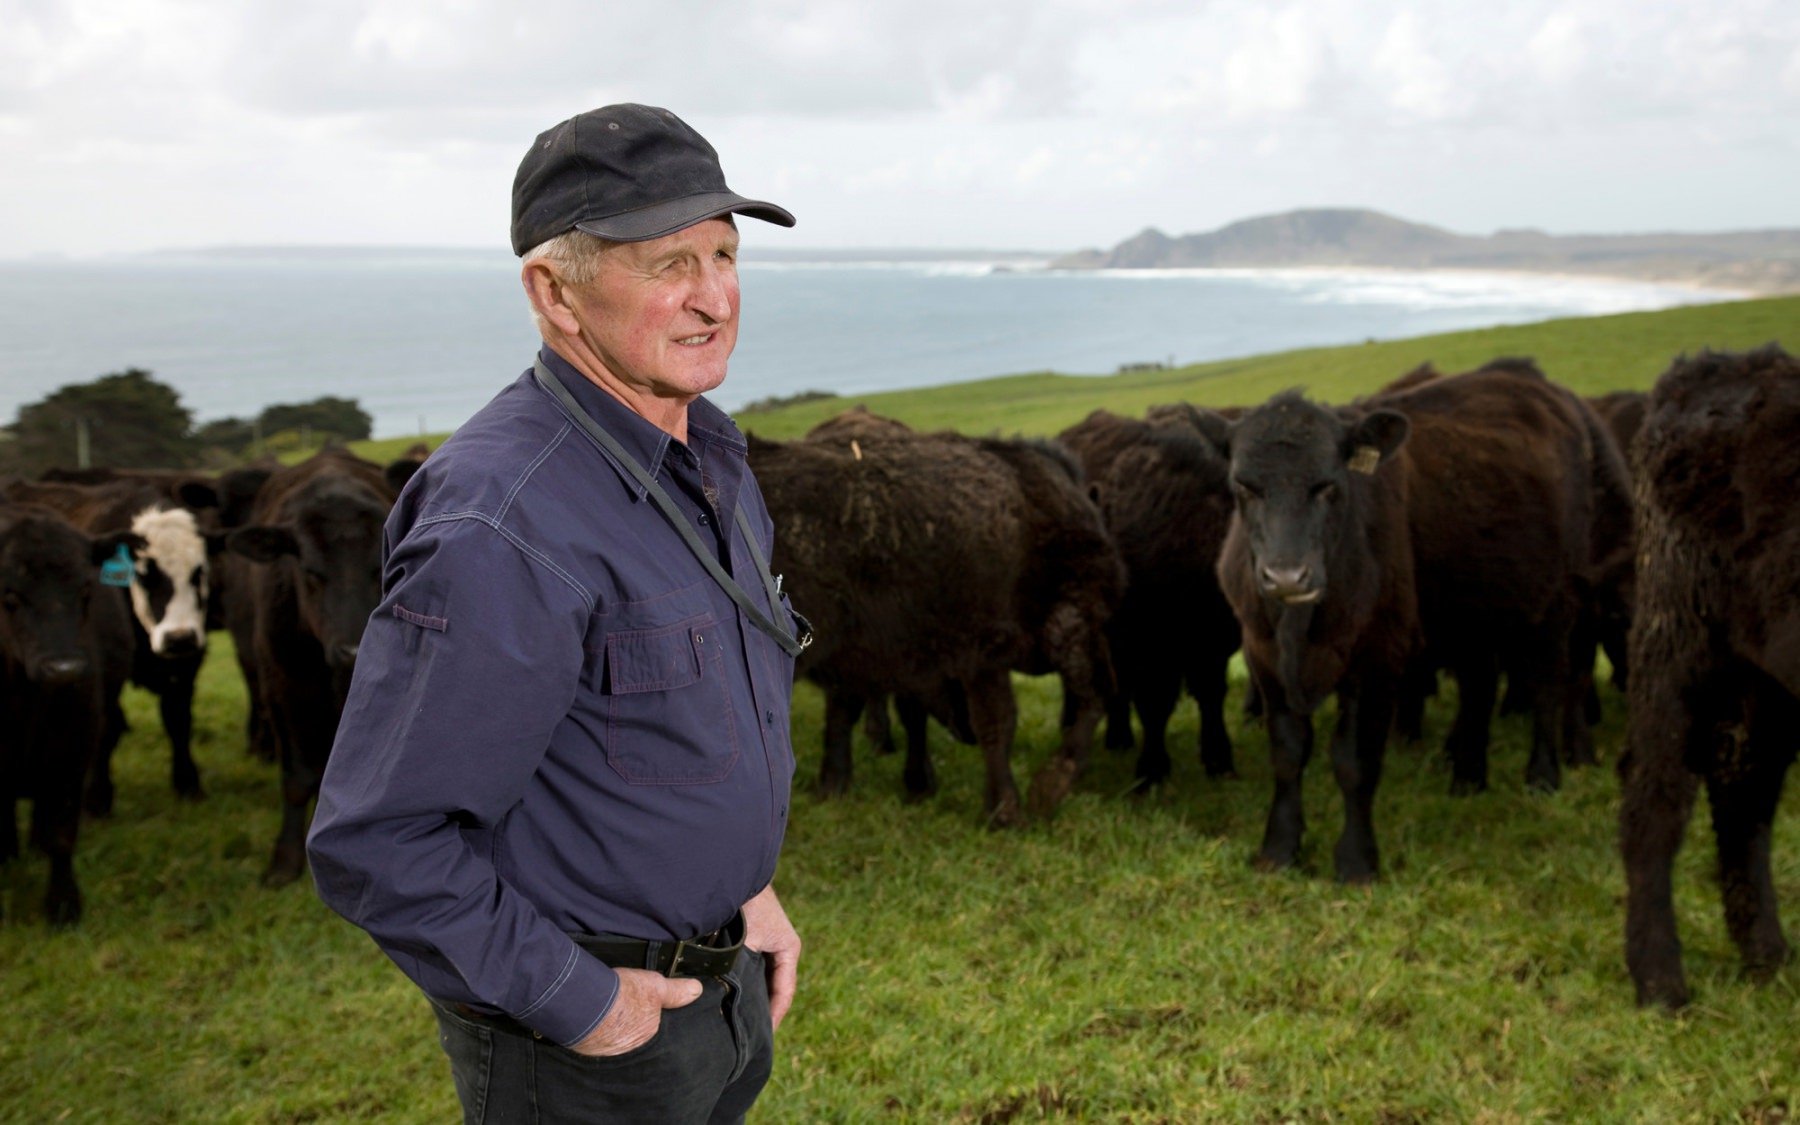 Older farmer overlooking his cows on green field with ocean in distant background.